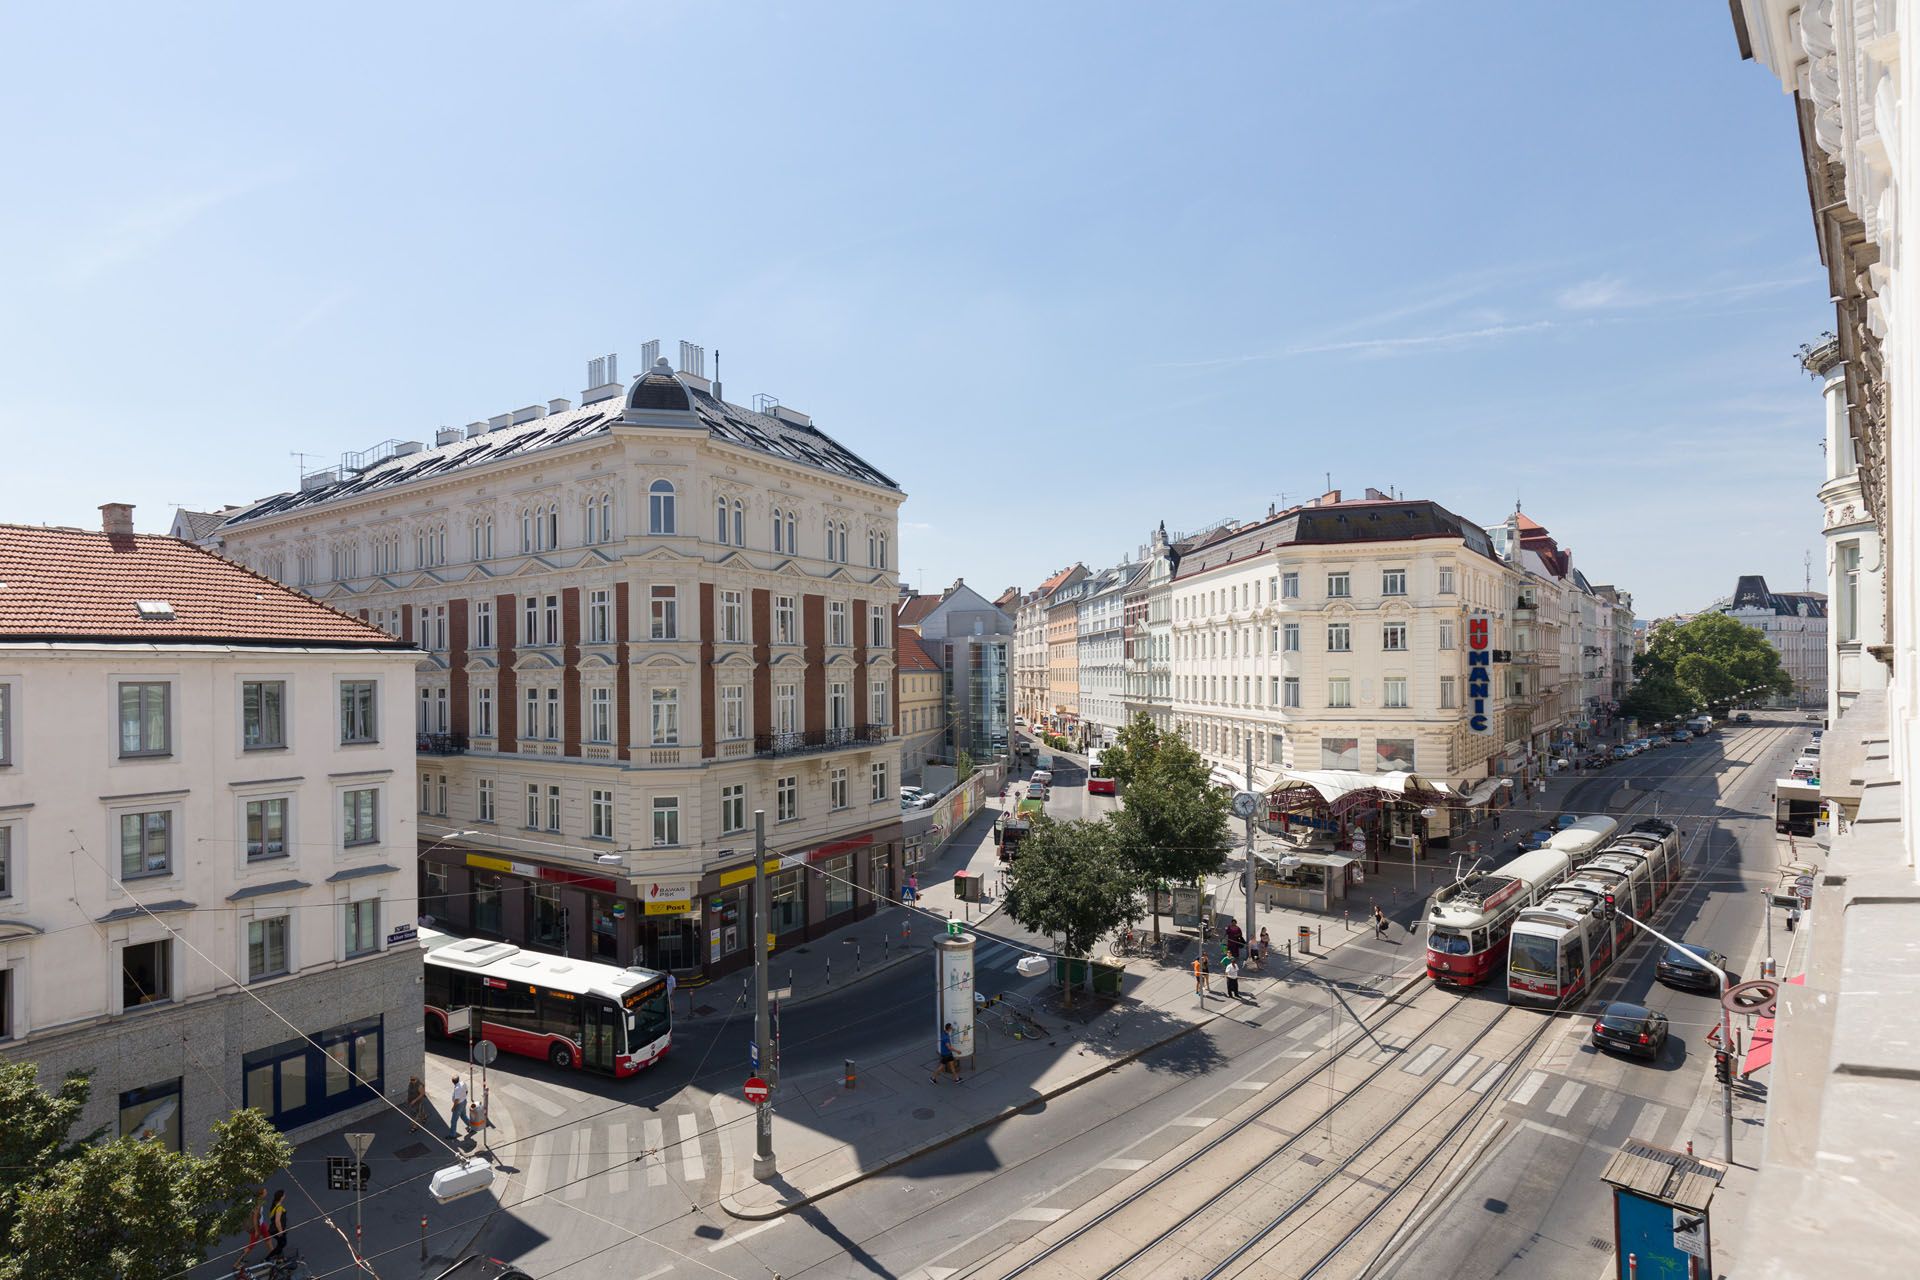 Vienna Prestige Apartments Premium Studio Close to City Center  Alser Strasse 14 Apartments size in m²: 55
District: 1090 Alsergrund
Bedroom: 1  Internet, Digital Cable TV, Fully equipped kitchen, Fully furnished interior, Non smoking, Cleaning utensils supplied 